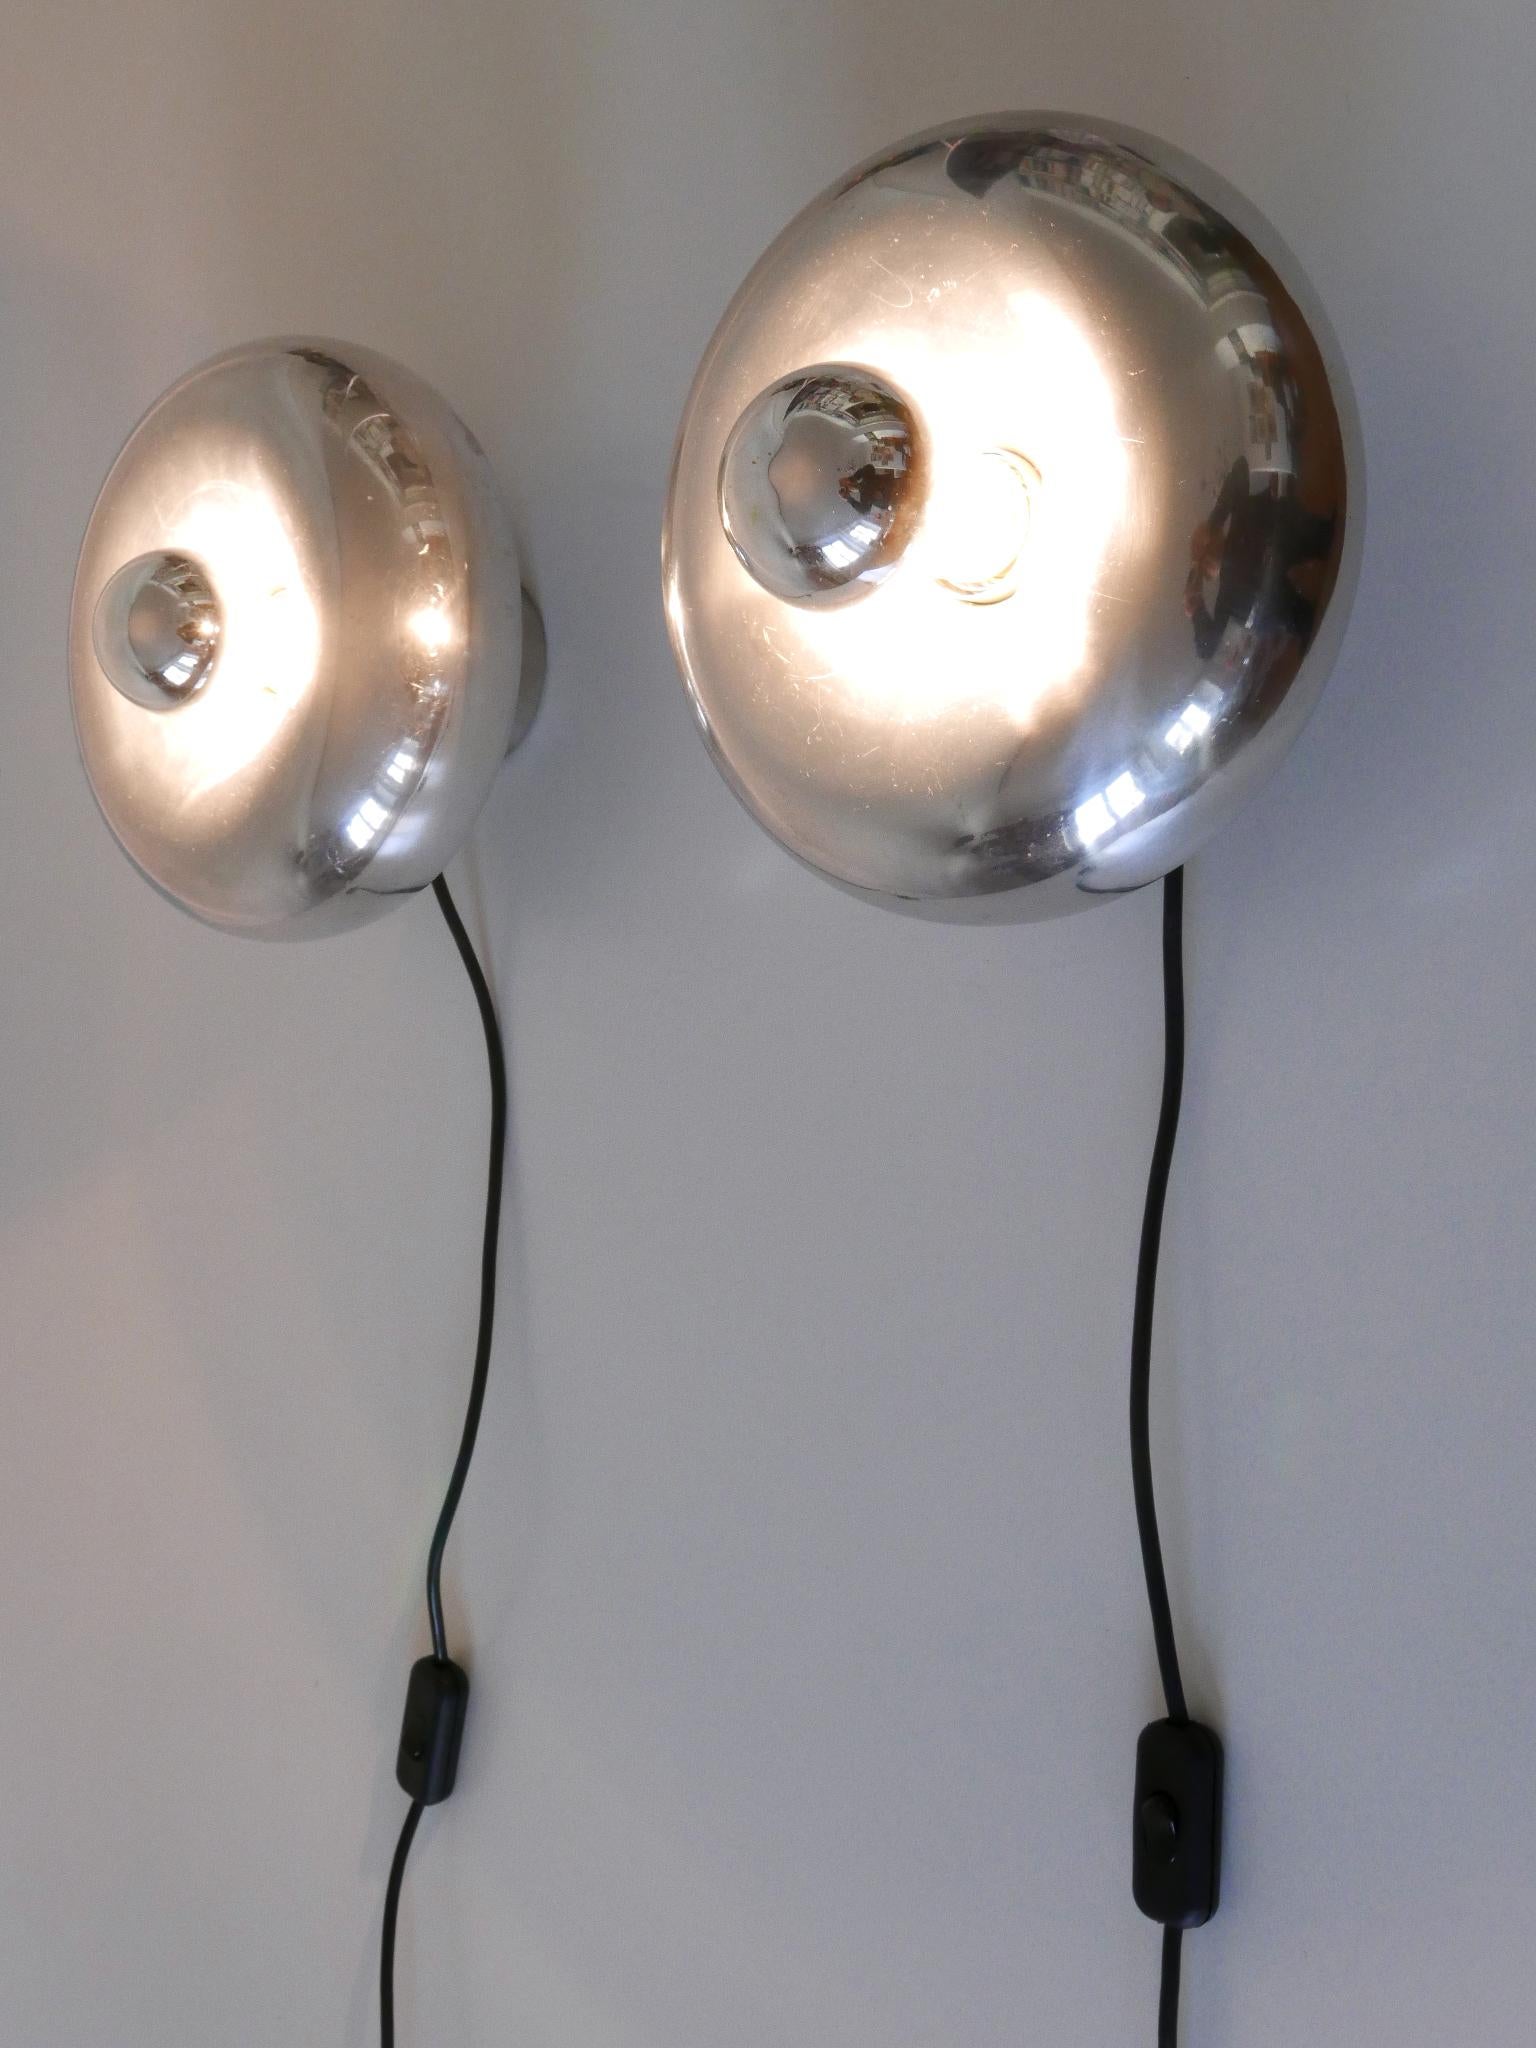 Set of two rare and elegant Modernist sconces or table lamps 'Pox' in donut shape. Adjustable height. Designed by Ingo Maurer for Design M, Germany, 1960s.

Executed in aluminium and metal, each lamp needs 1 x E27 / E26 Edison screw fit bulb, is